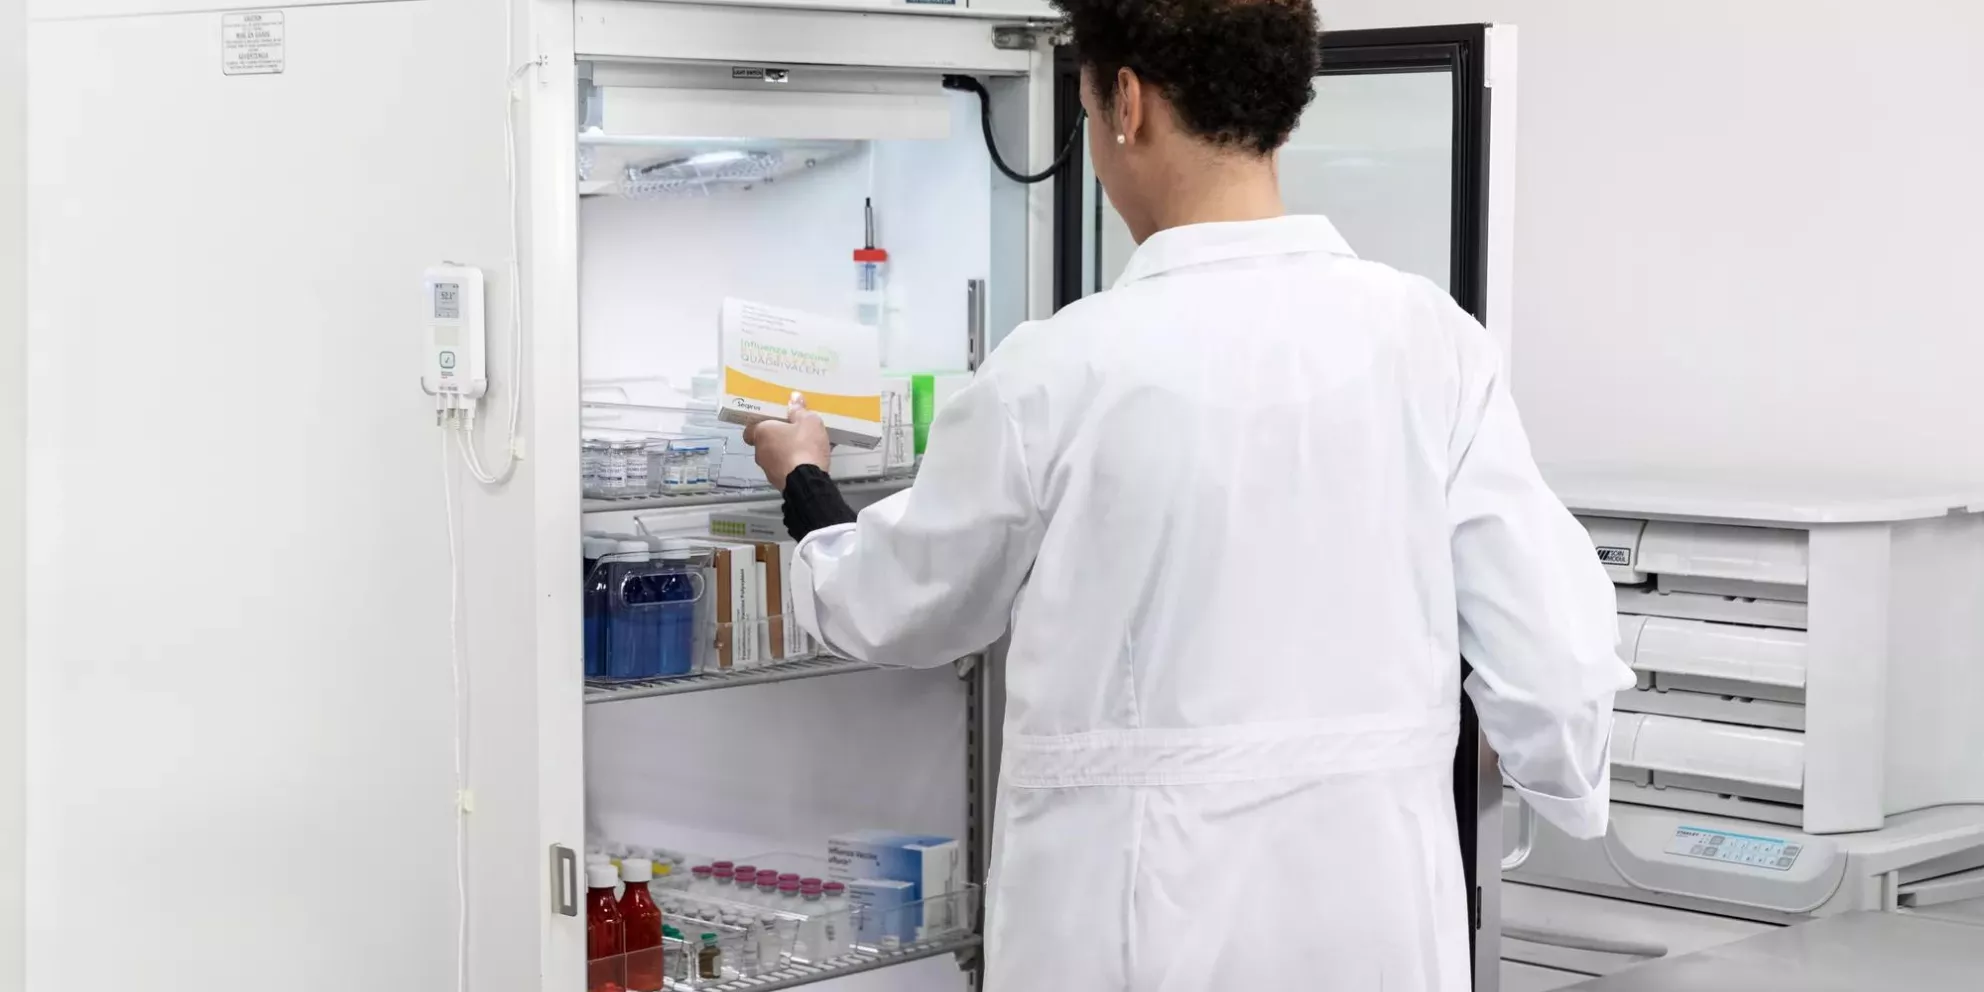 Retrieving vaccine from refrigerator monitored by Securitas Healthcare T15 tag